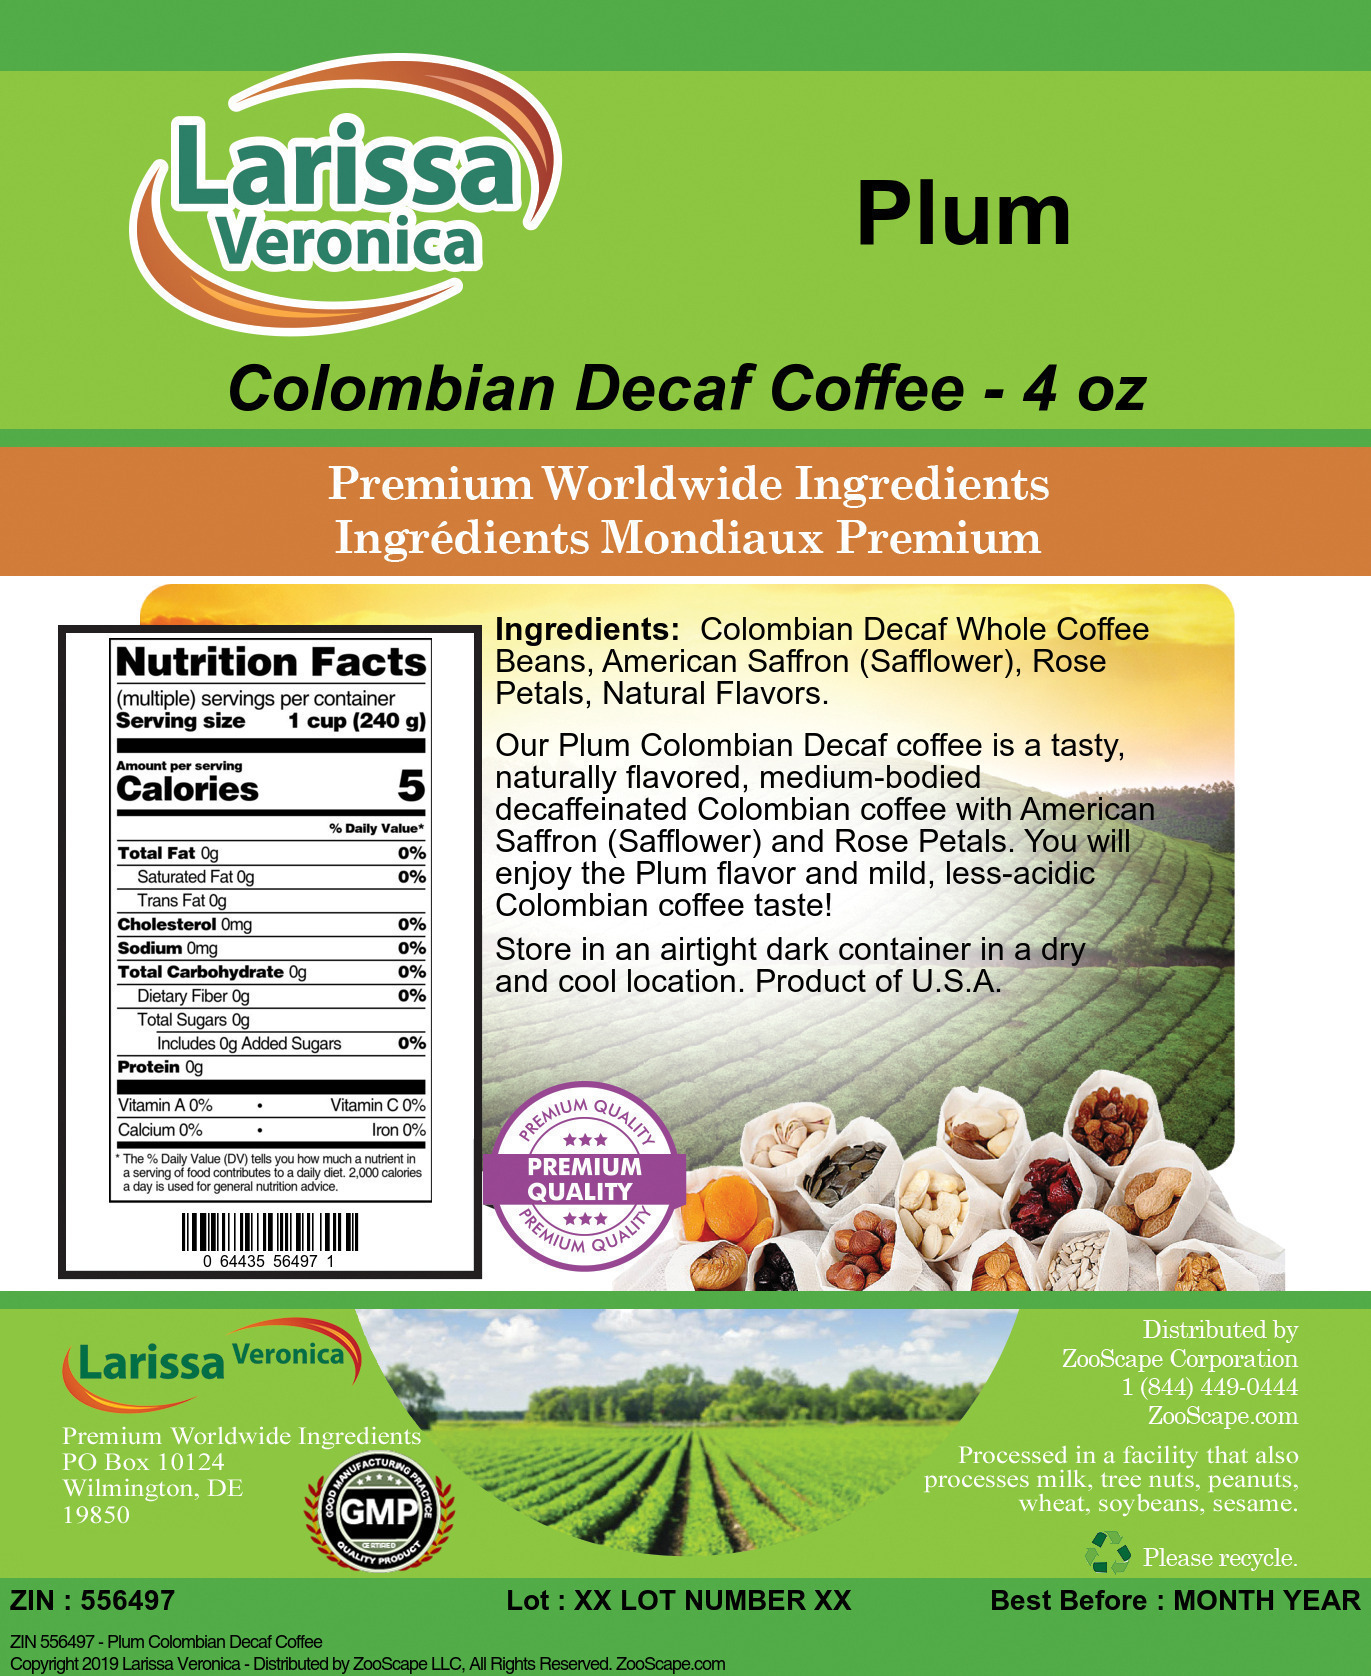 Plum Colombian Decaf Coffee - Label